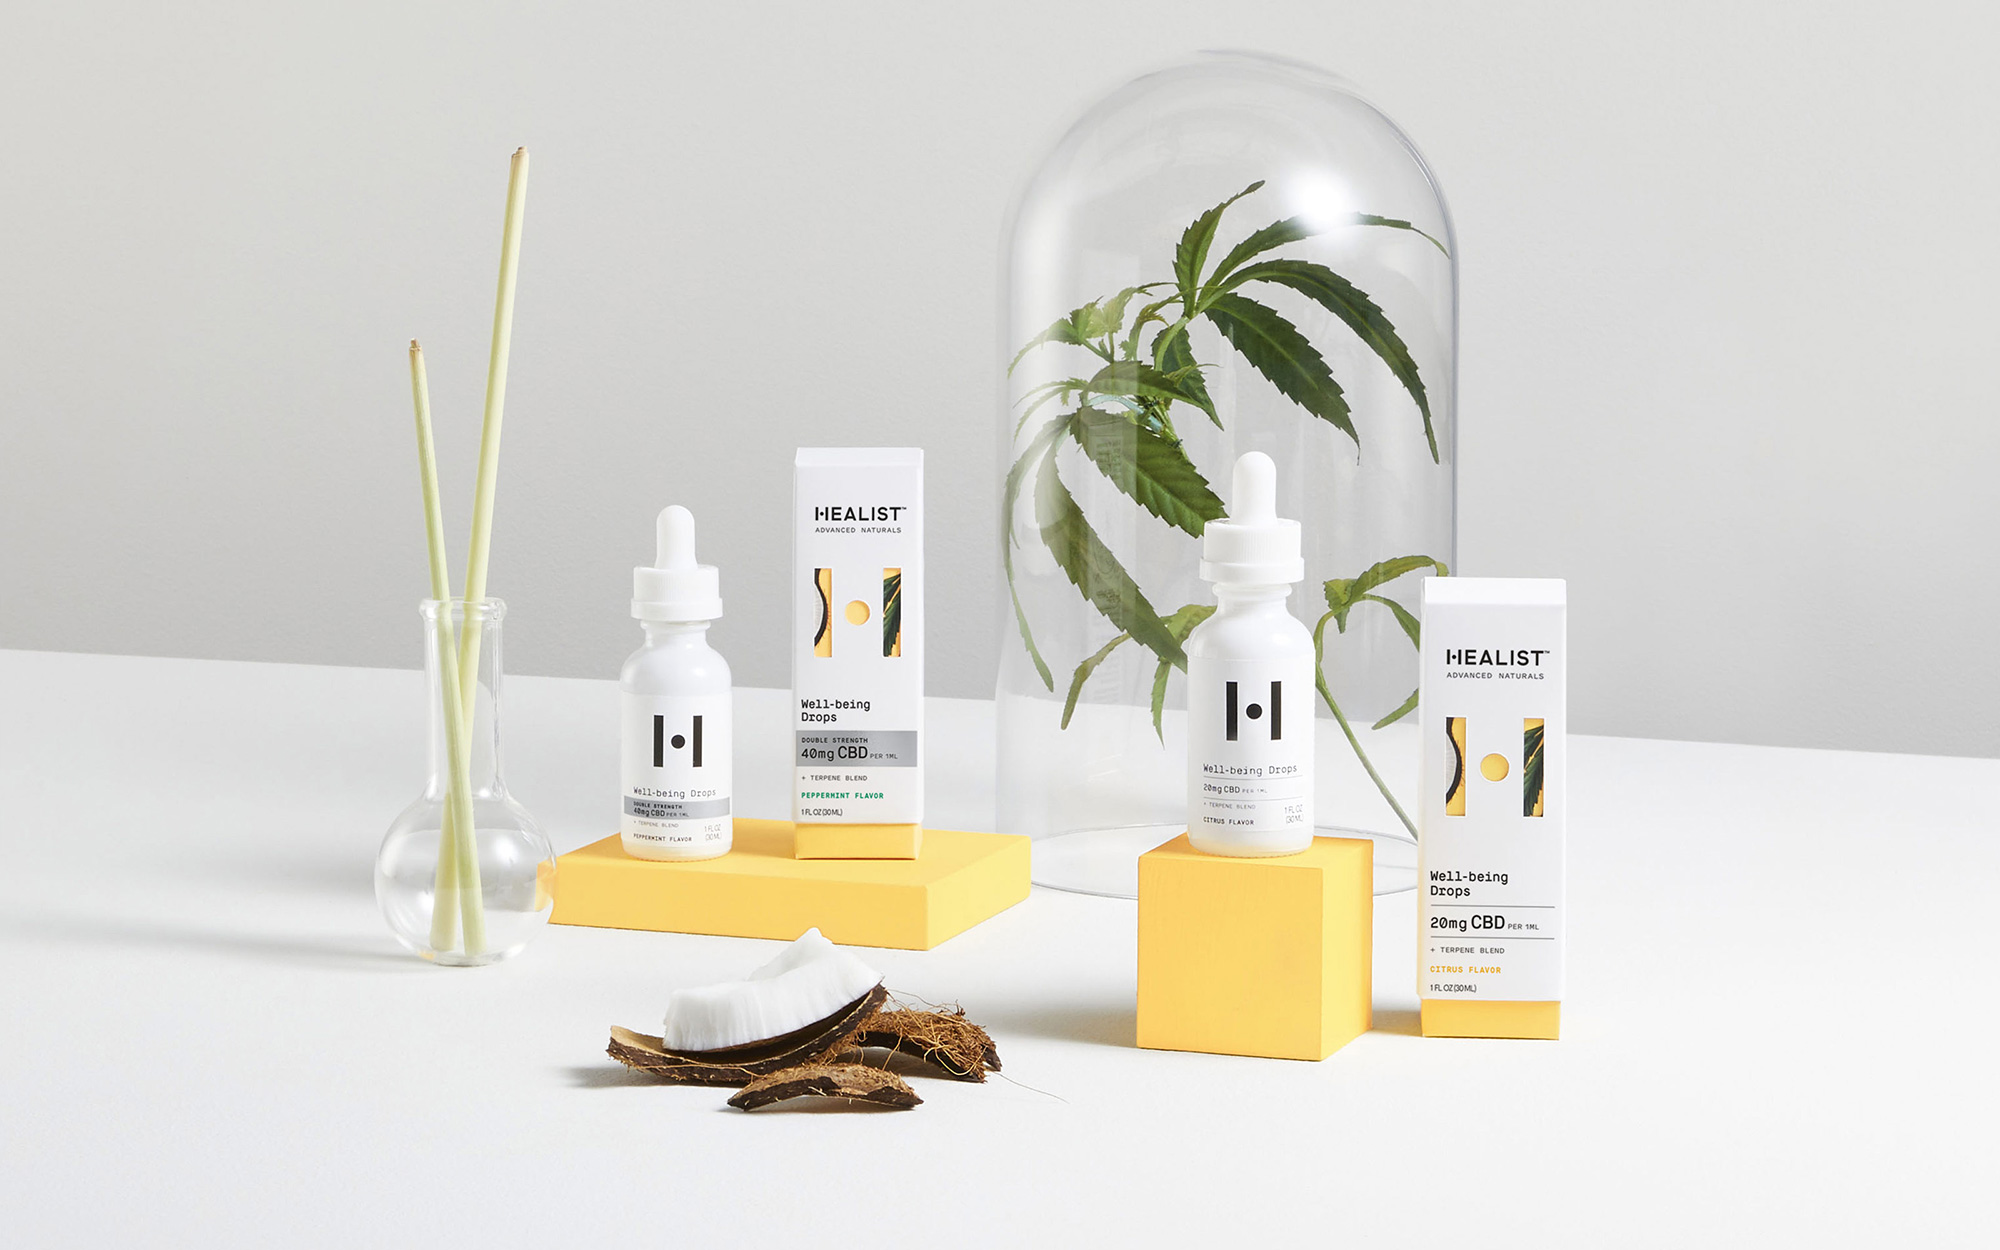 New Logo, Identity, and Packaging for Healist Naturals by Robot Food